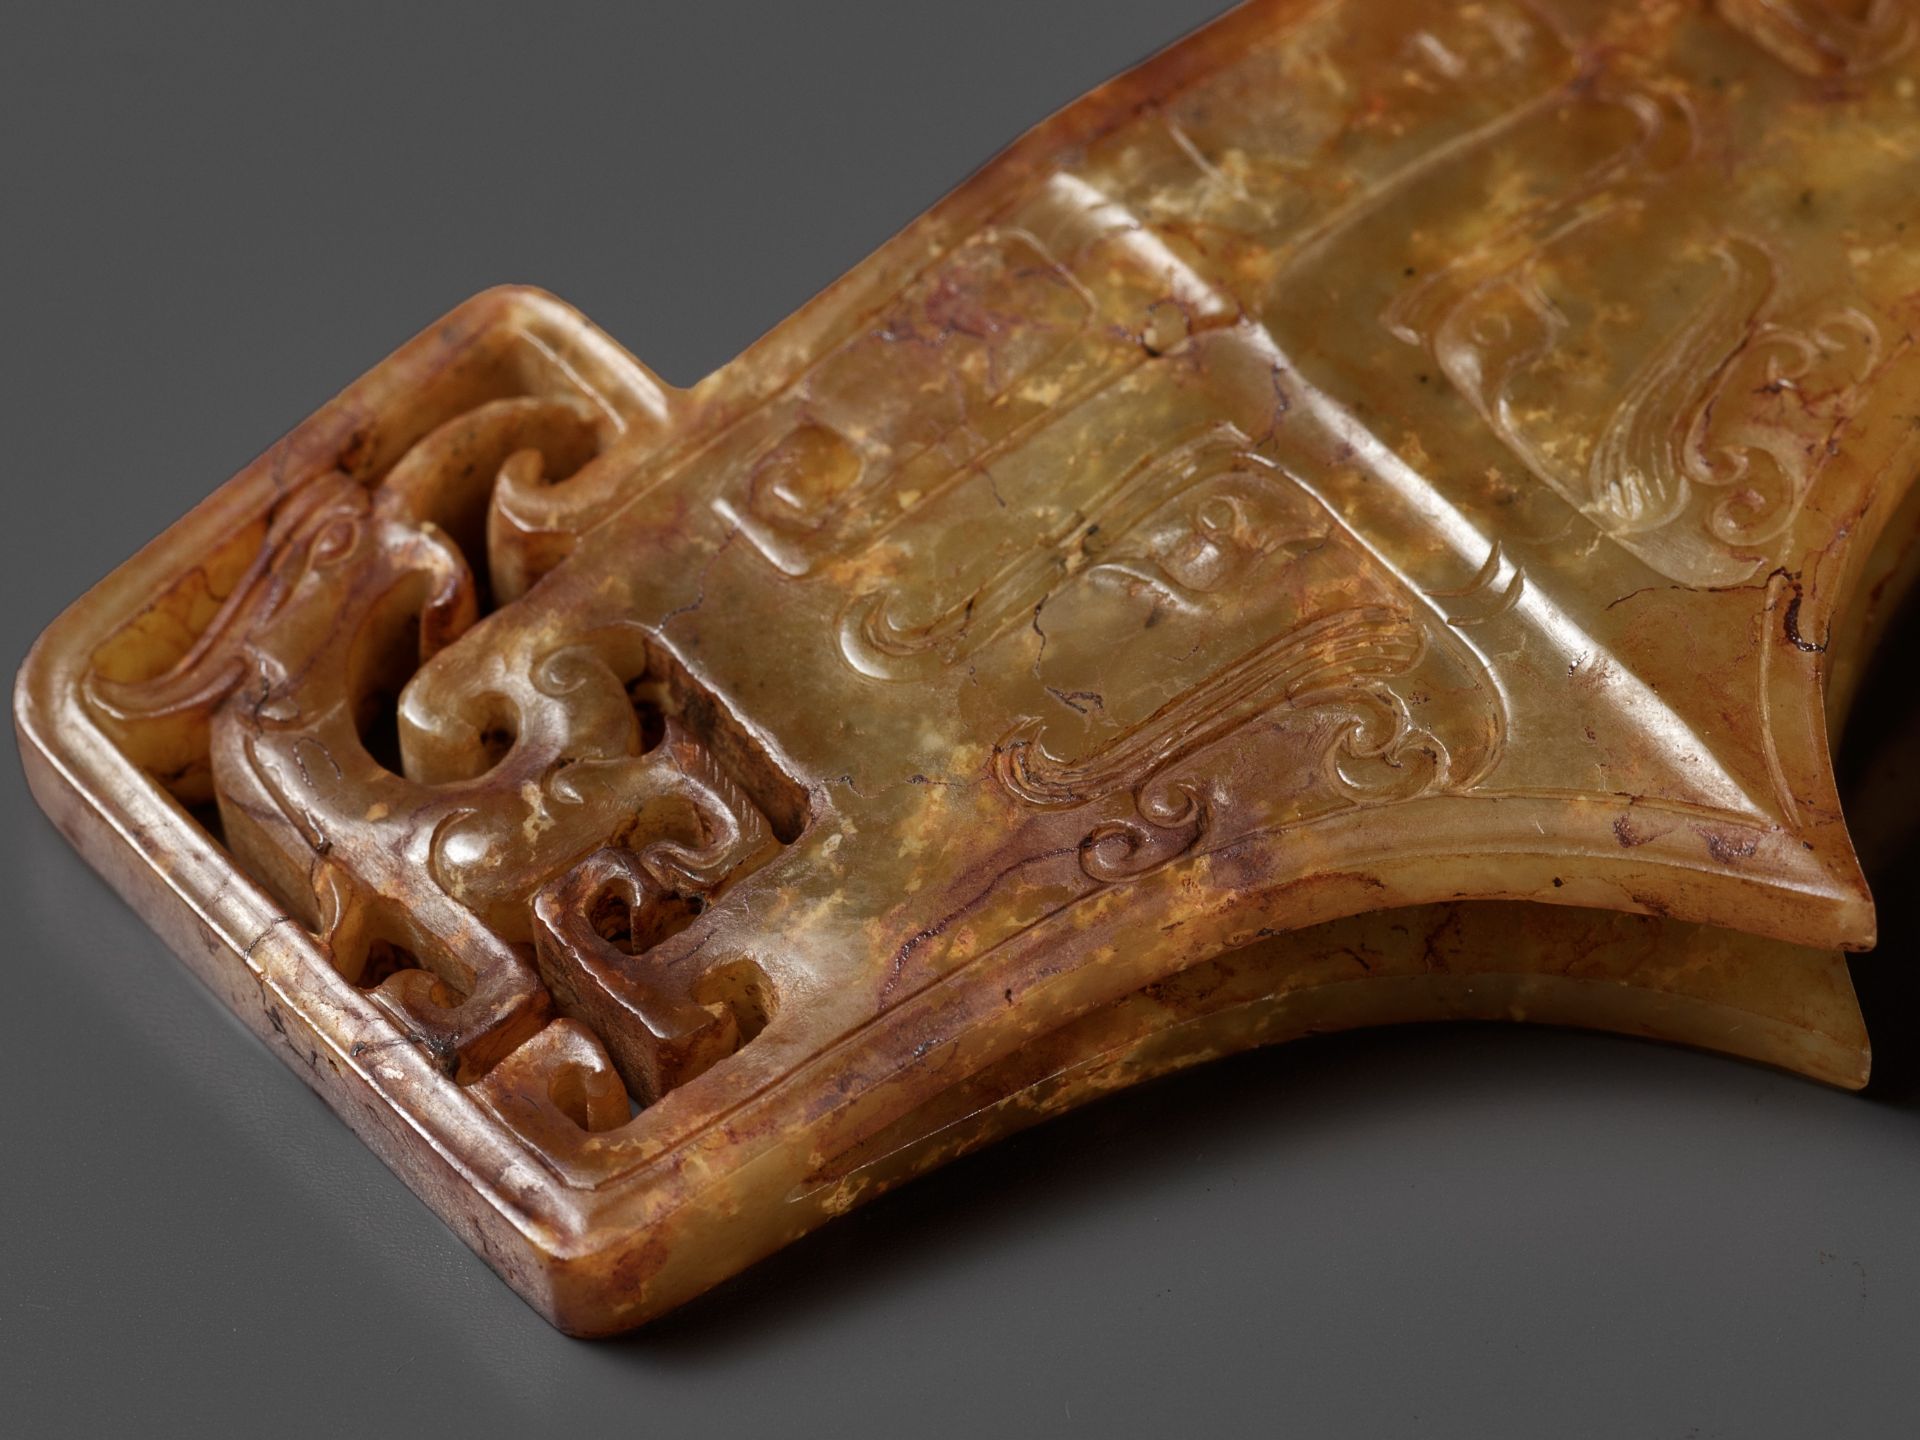 A RARE AND COMPLETE SET OF FOUR JADE OPENWORK SWORD FITTINGS, WESTERN HAN DYNASTY - Image 25 of 29